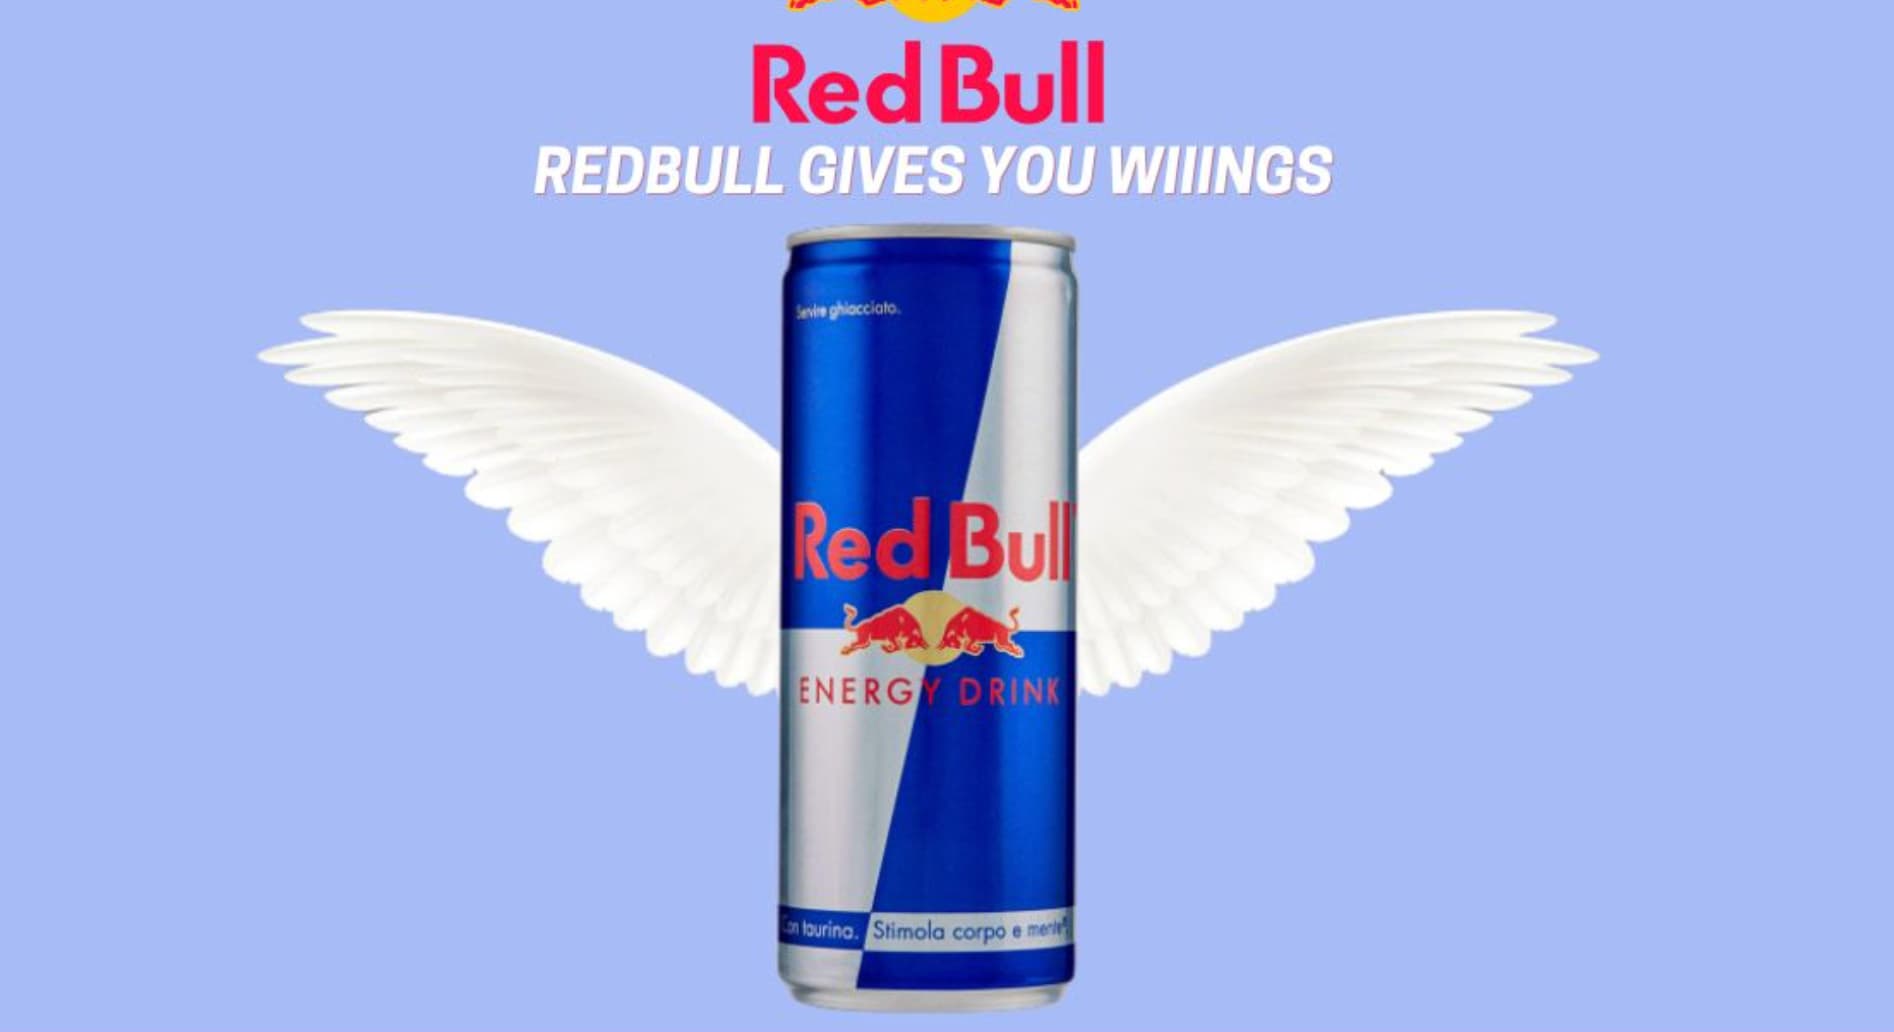 redbull slogan - Red Bull Redbull Gives You Wiiings Servire ghiacciato Red Bull 5 Energy Drink on touring. Stimola corpo e ment